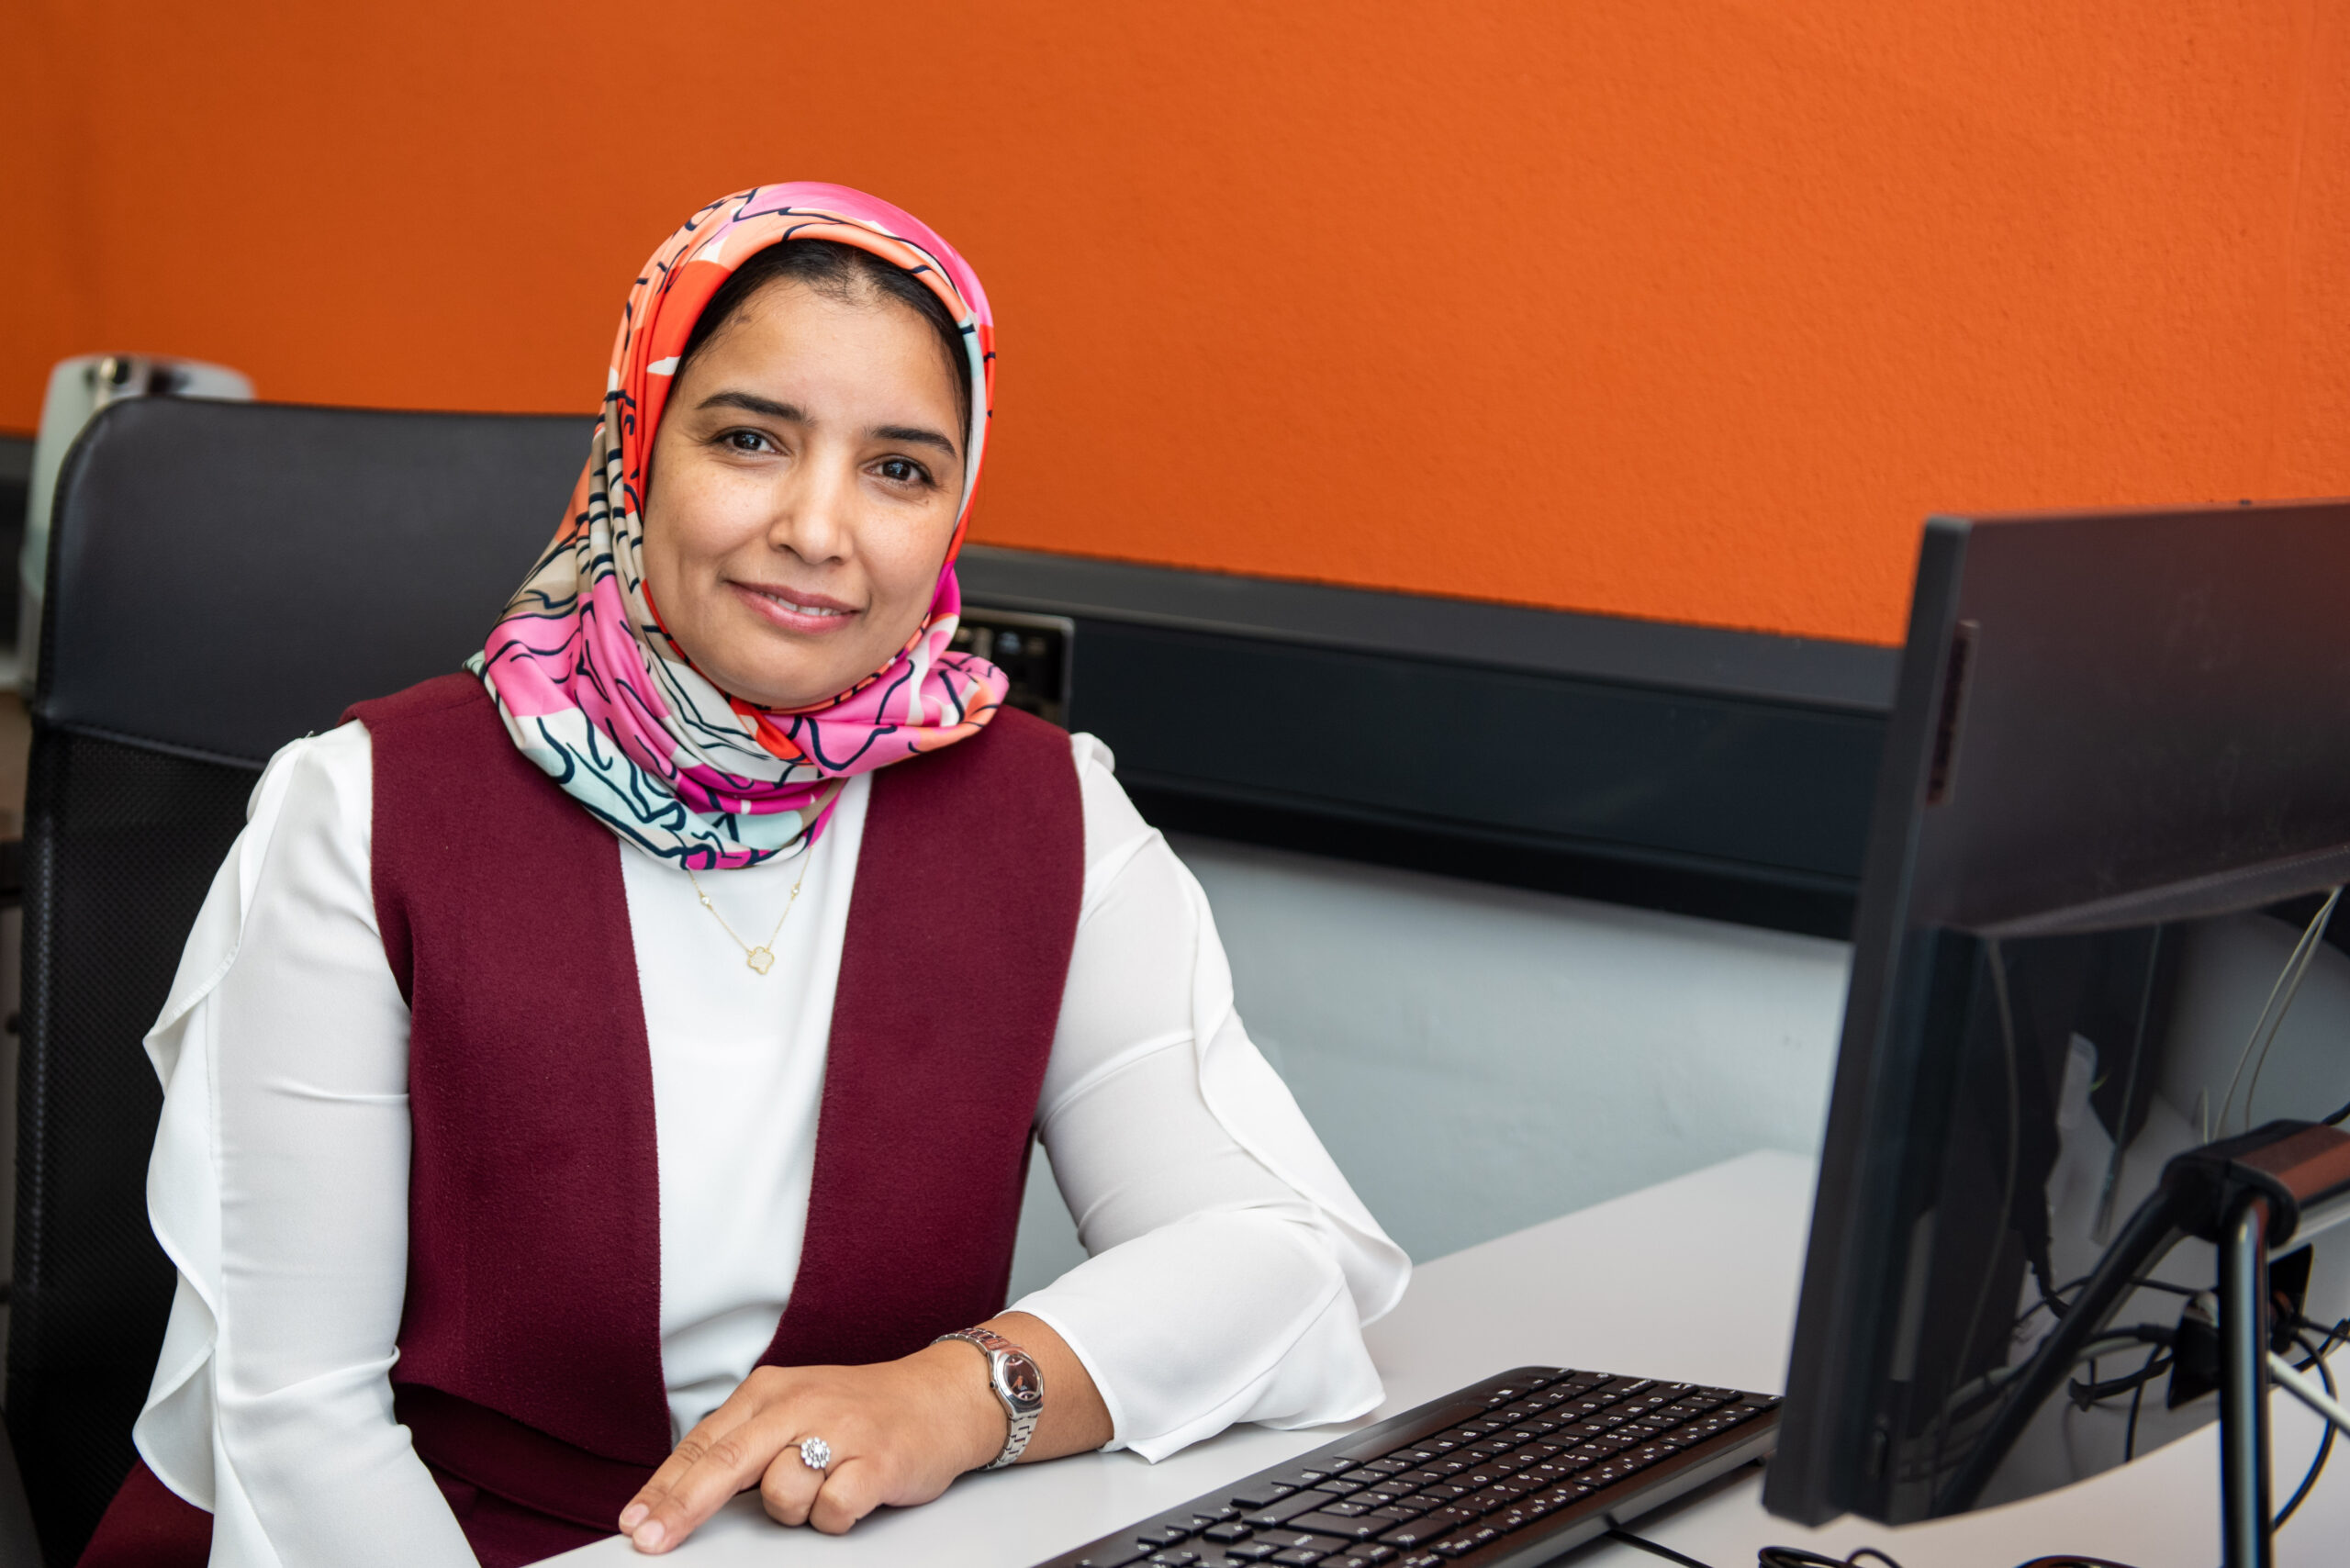 A photograph of Hafida Bouhadi. She is sat at a computer desk with a computer in front of her. She looks at the camera with a smile and rests her left arm on the computer desk.